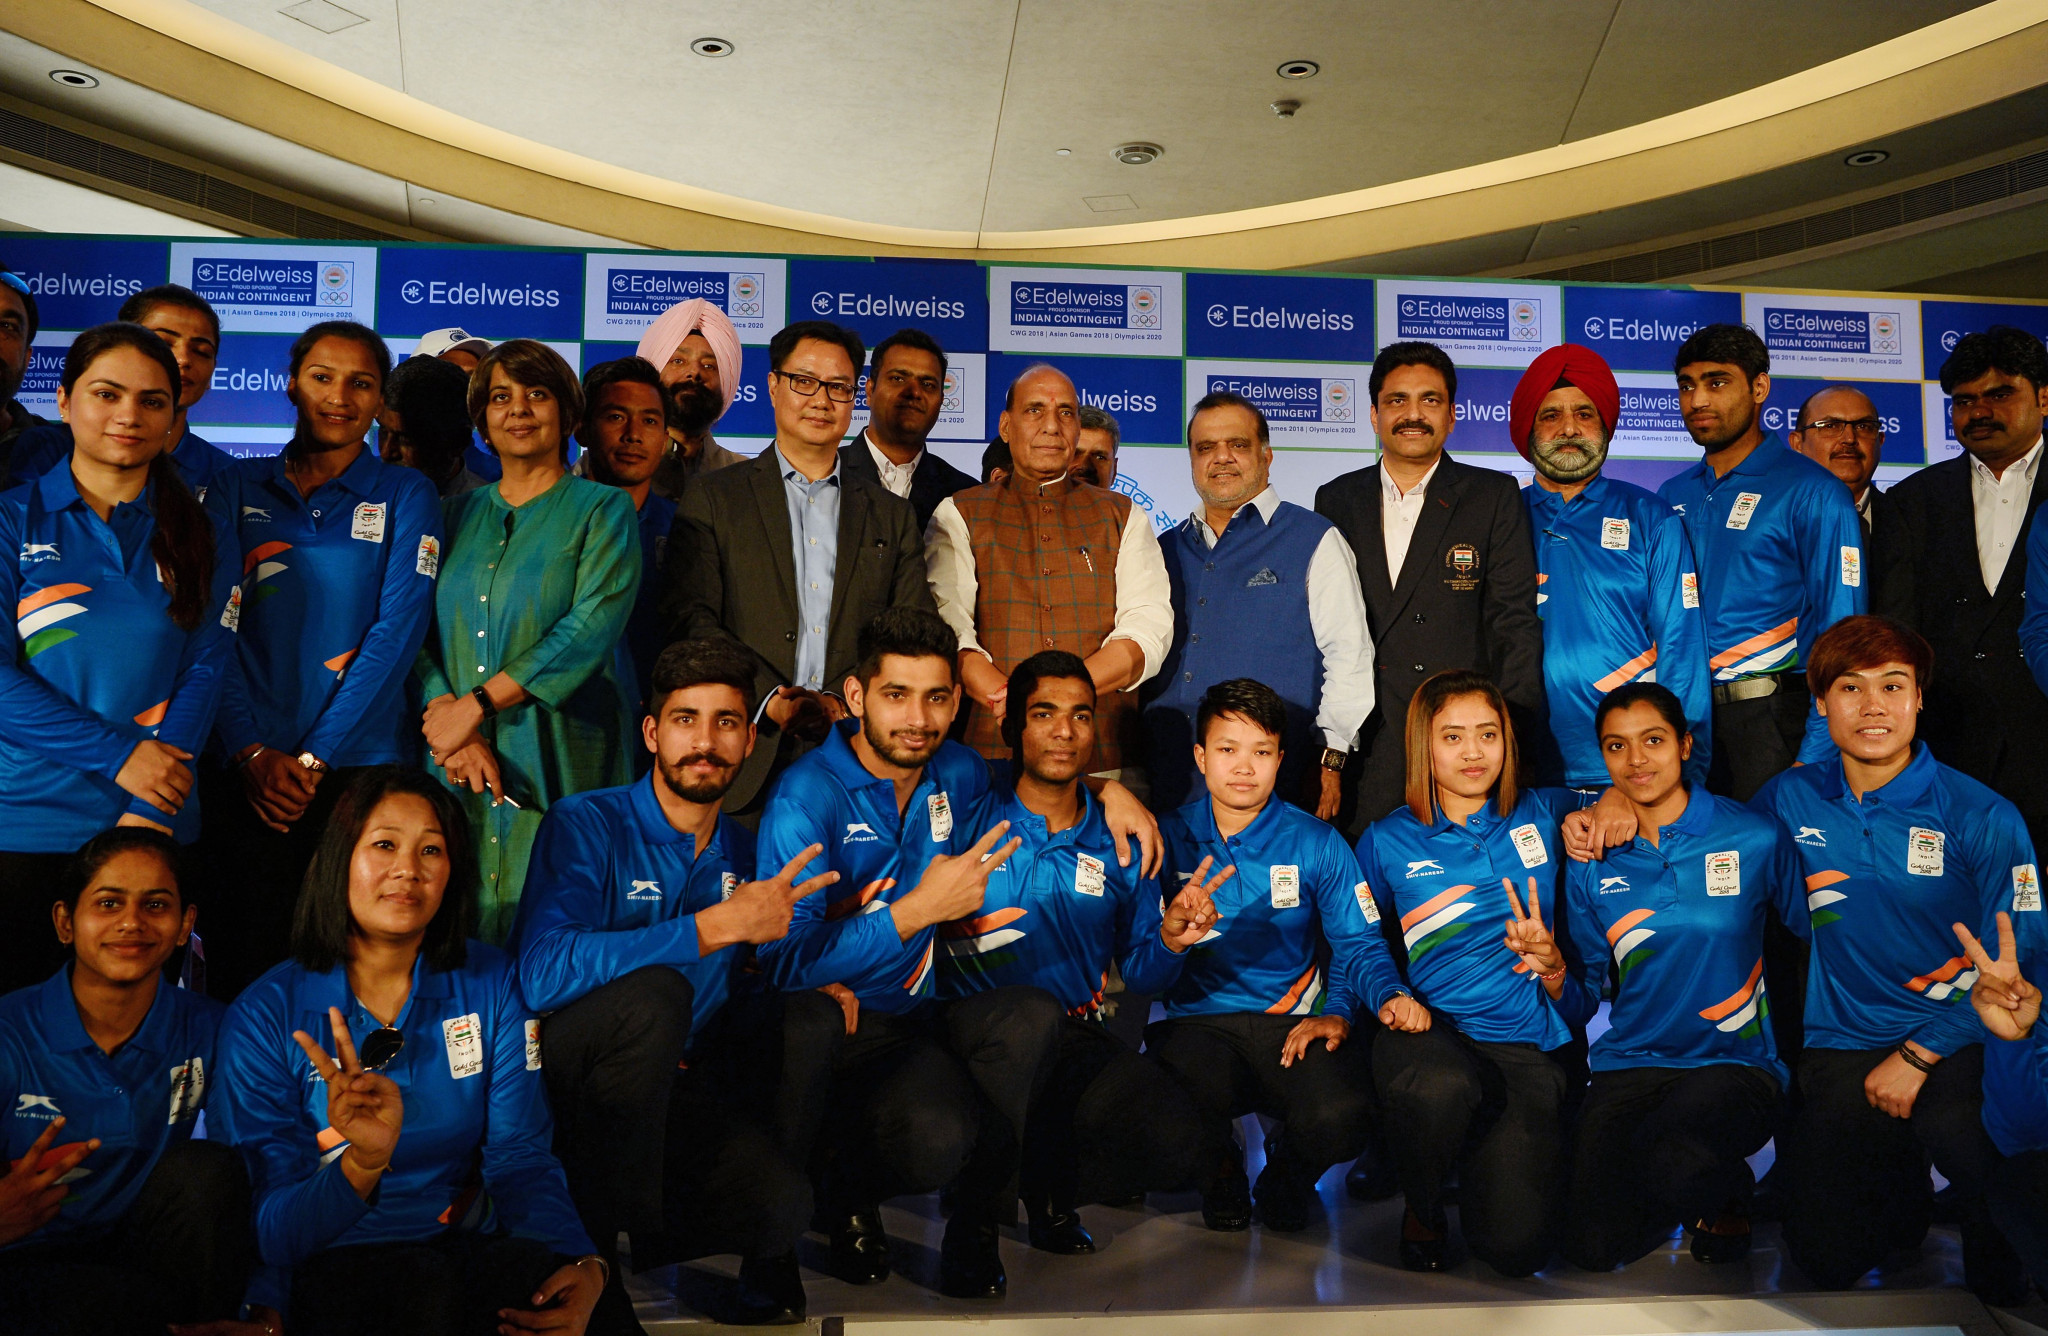 Narinder Batra made the comments at an official send-off event for the Indian team competing at Gold Coast 2018 ©Getty Images